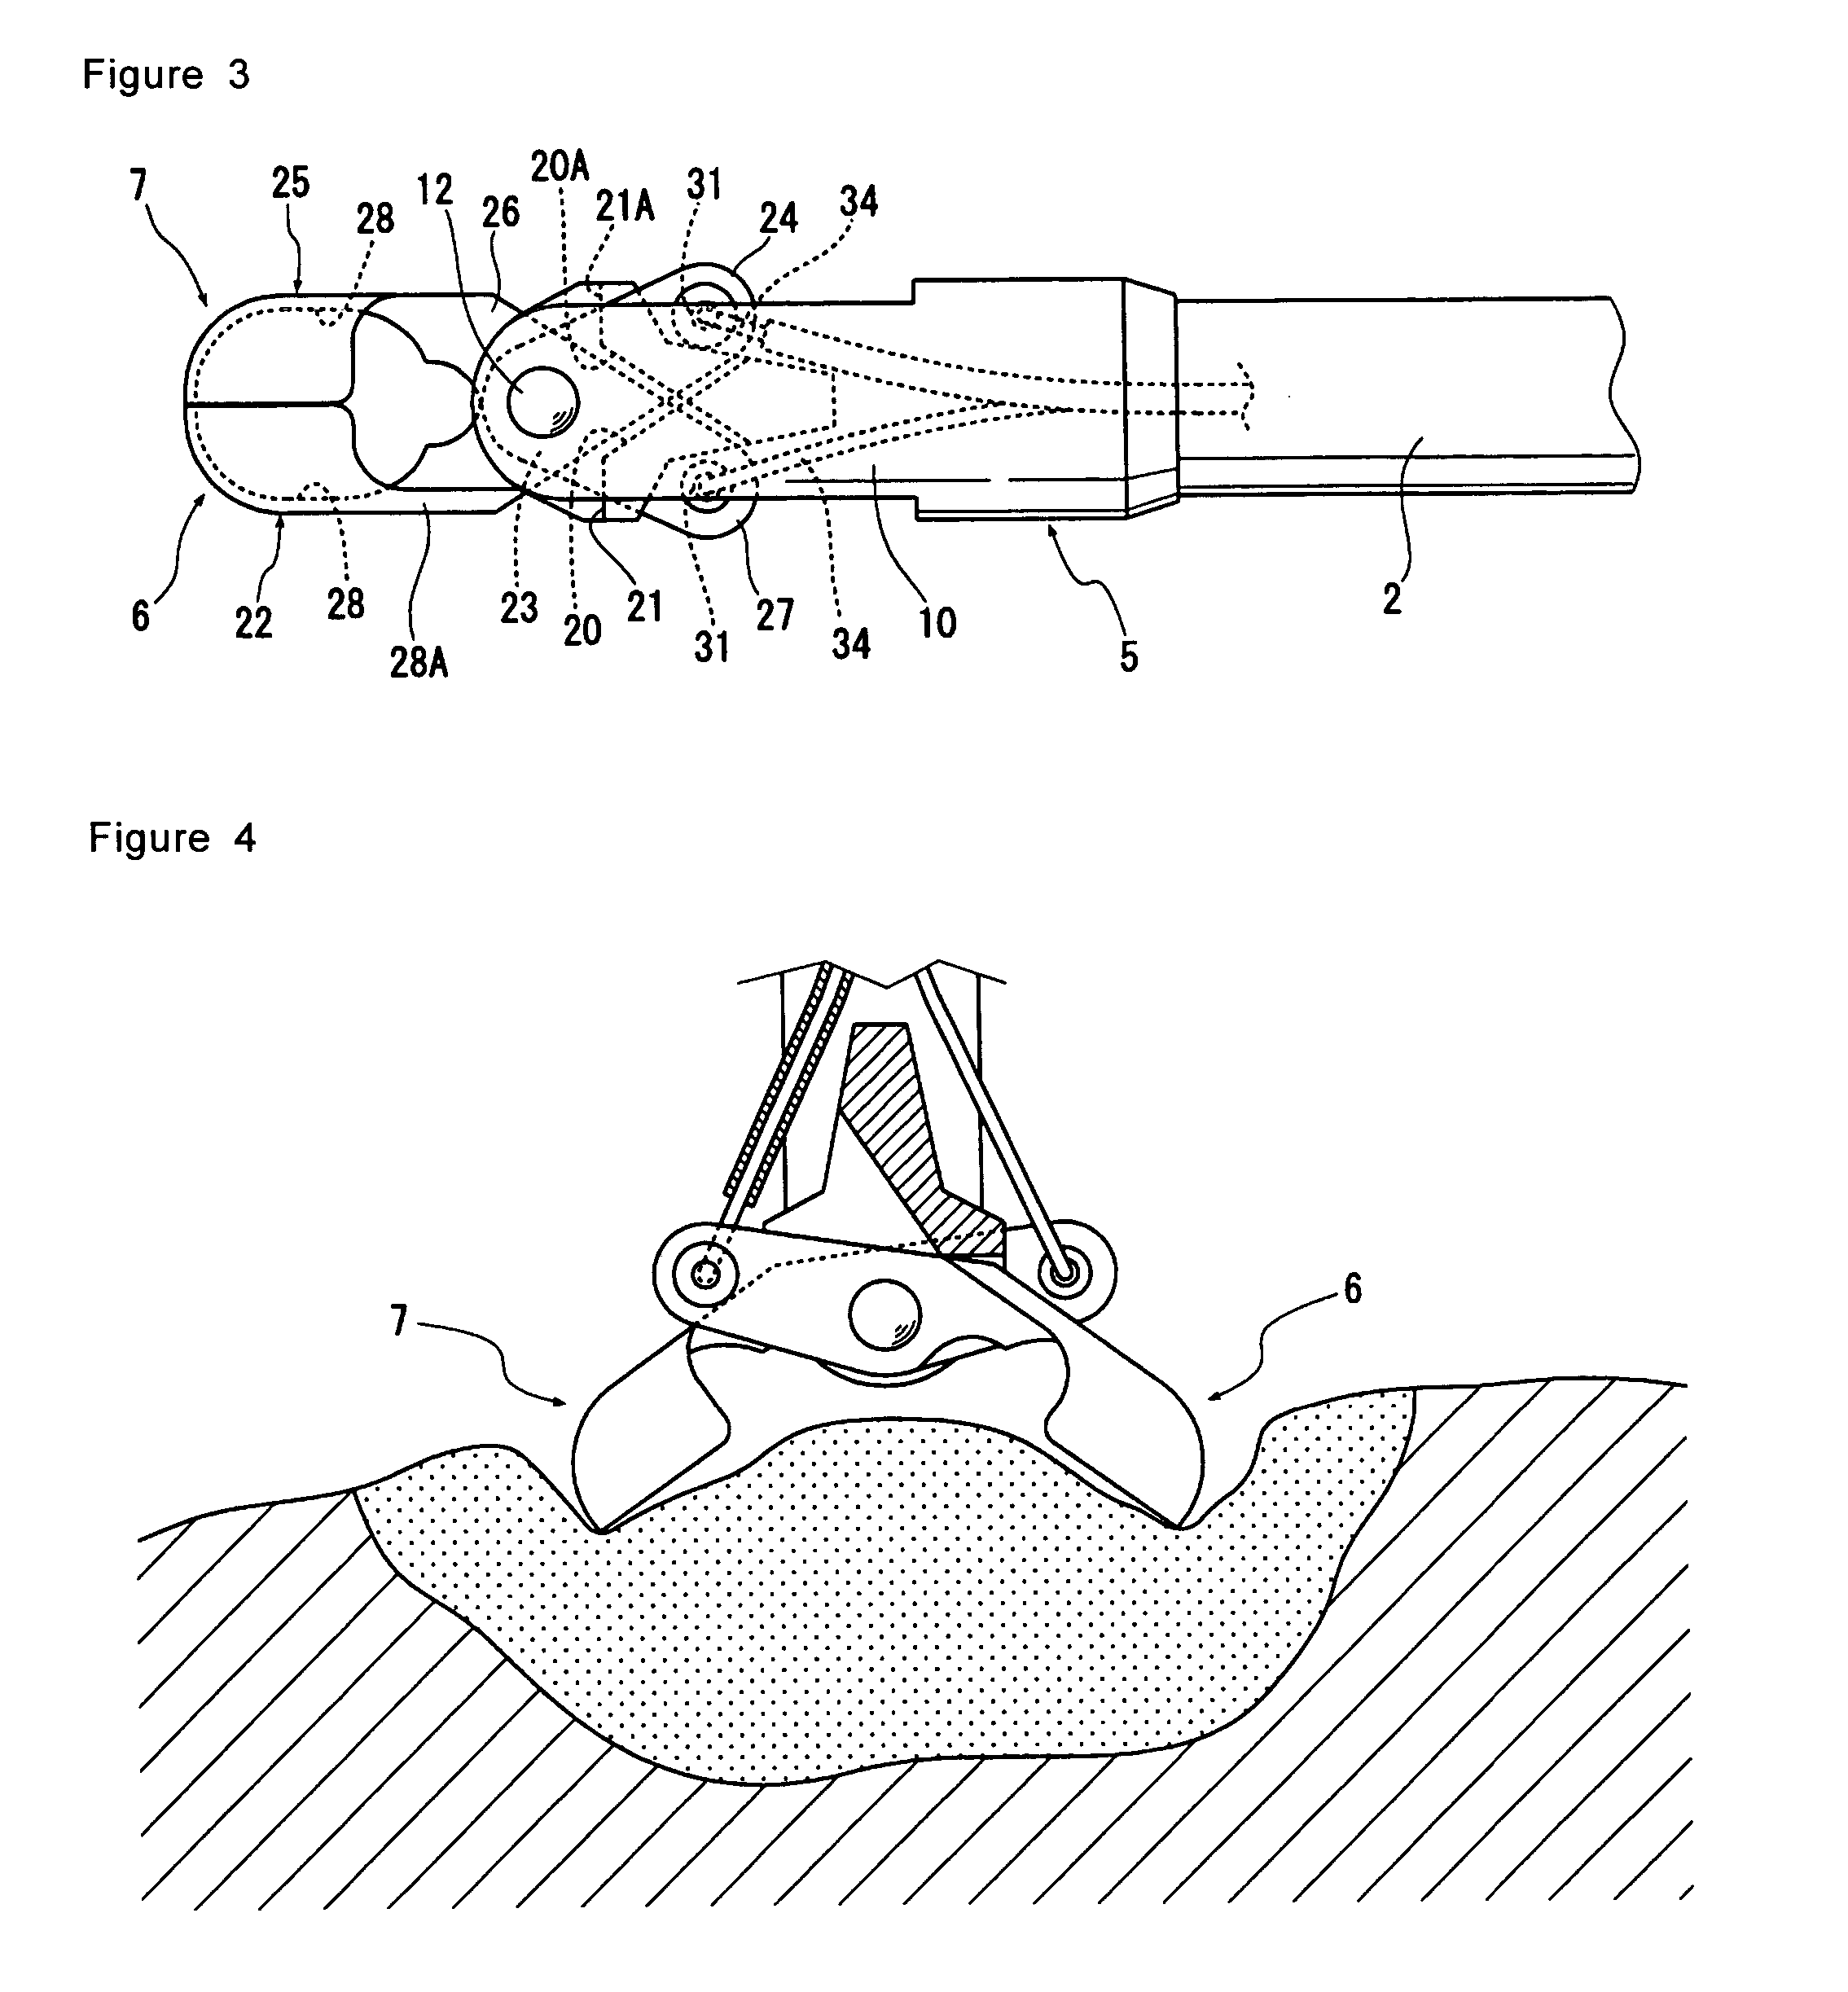 Bipolar high frequency treatment device